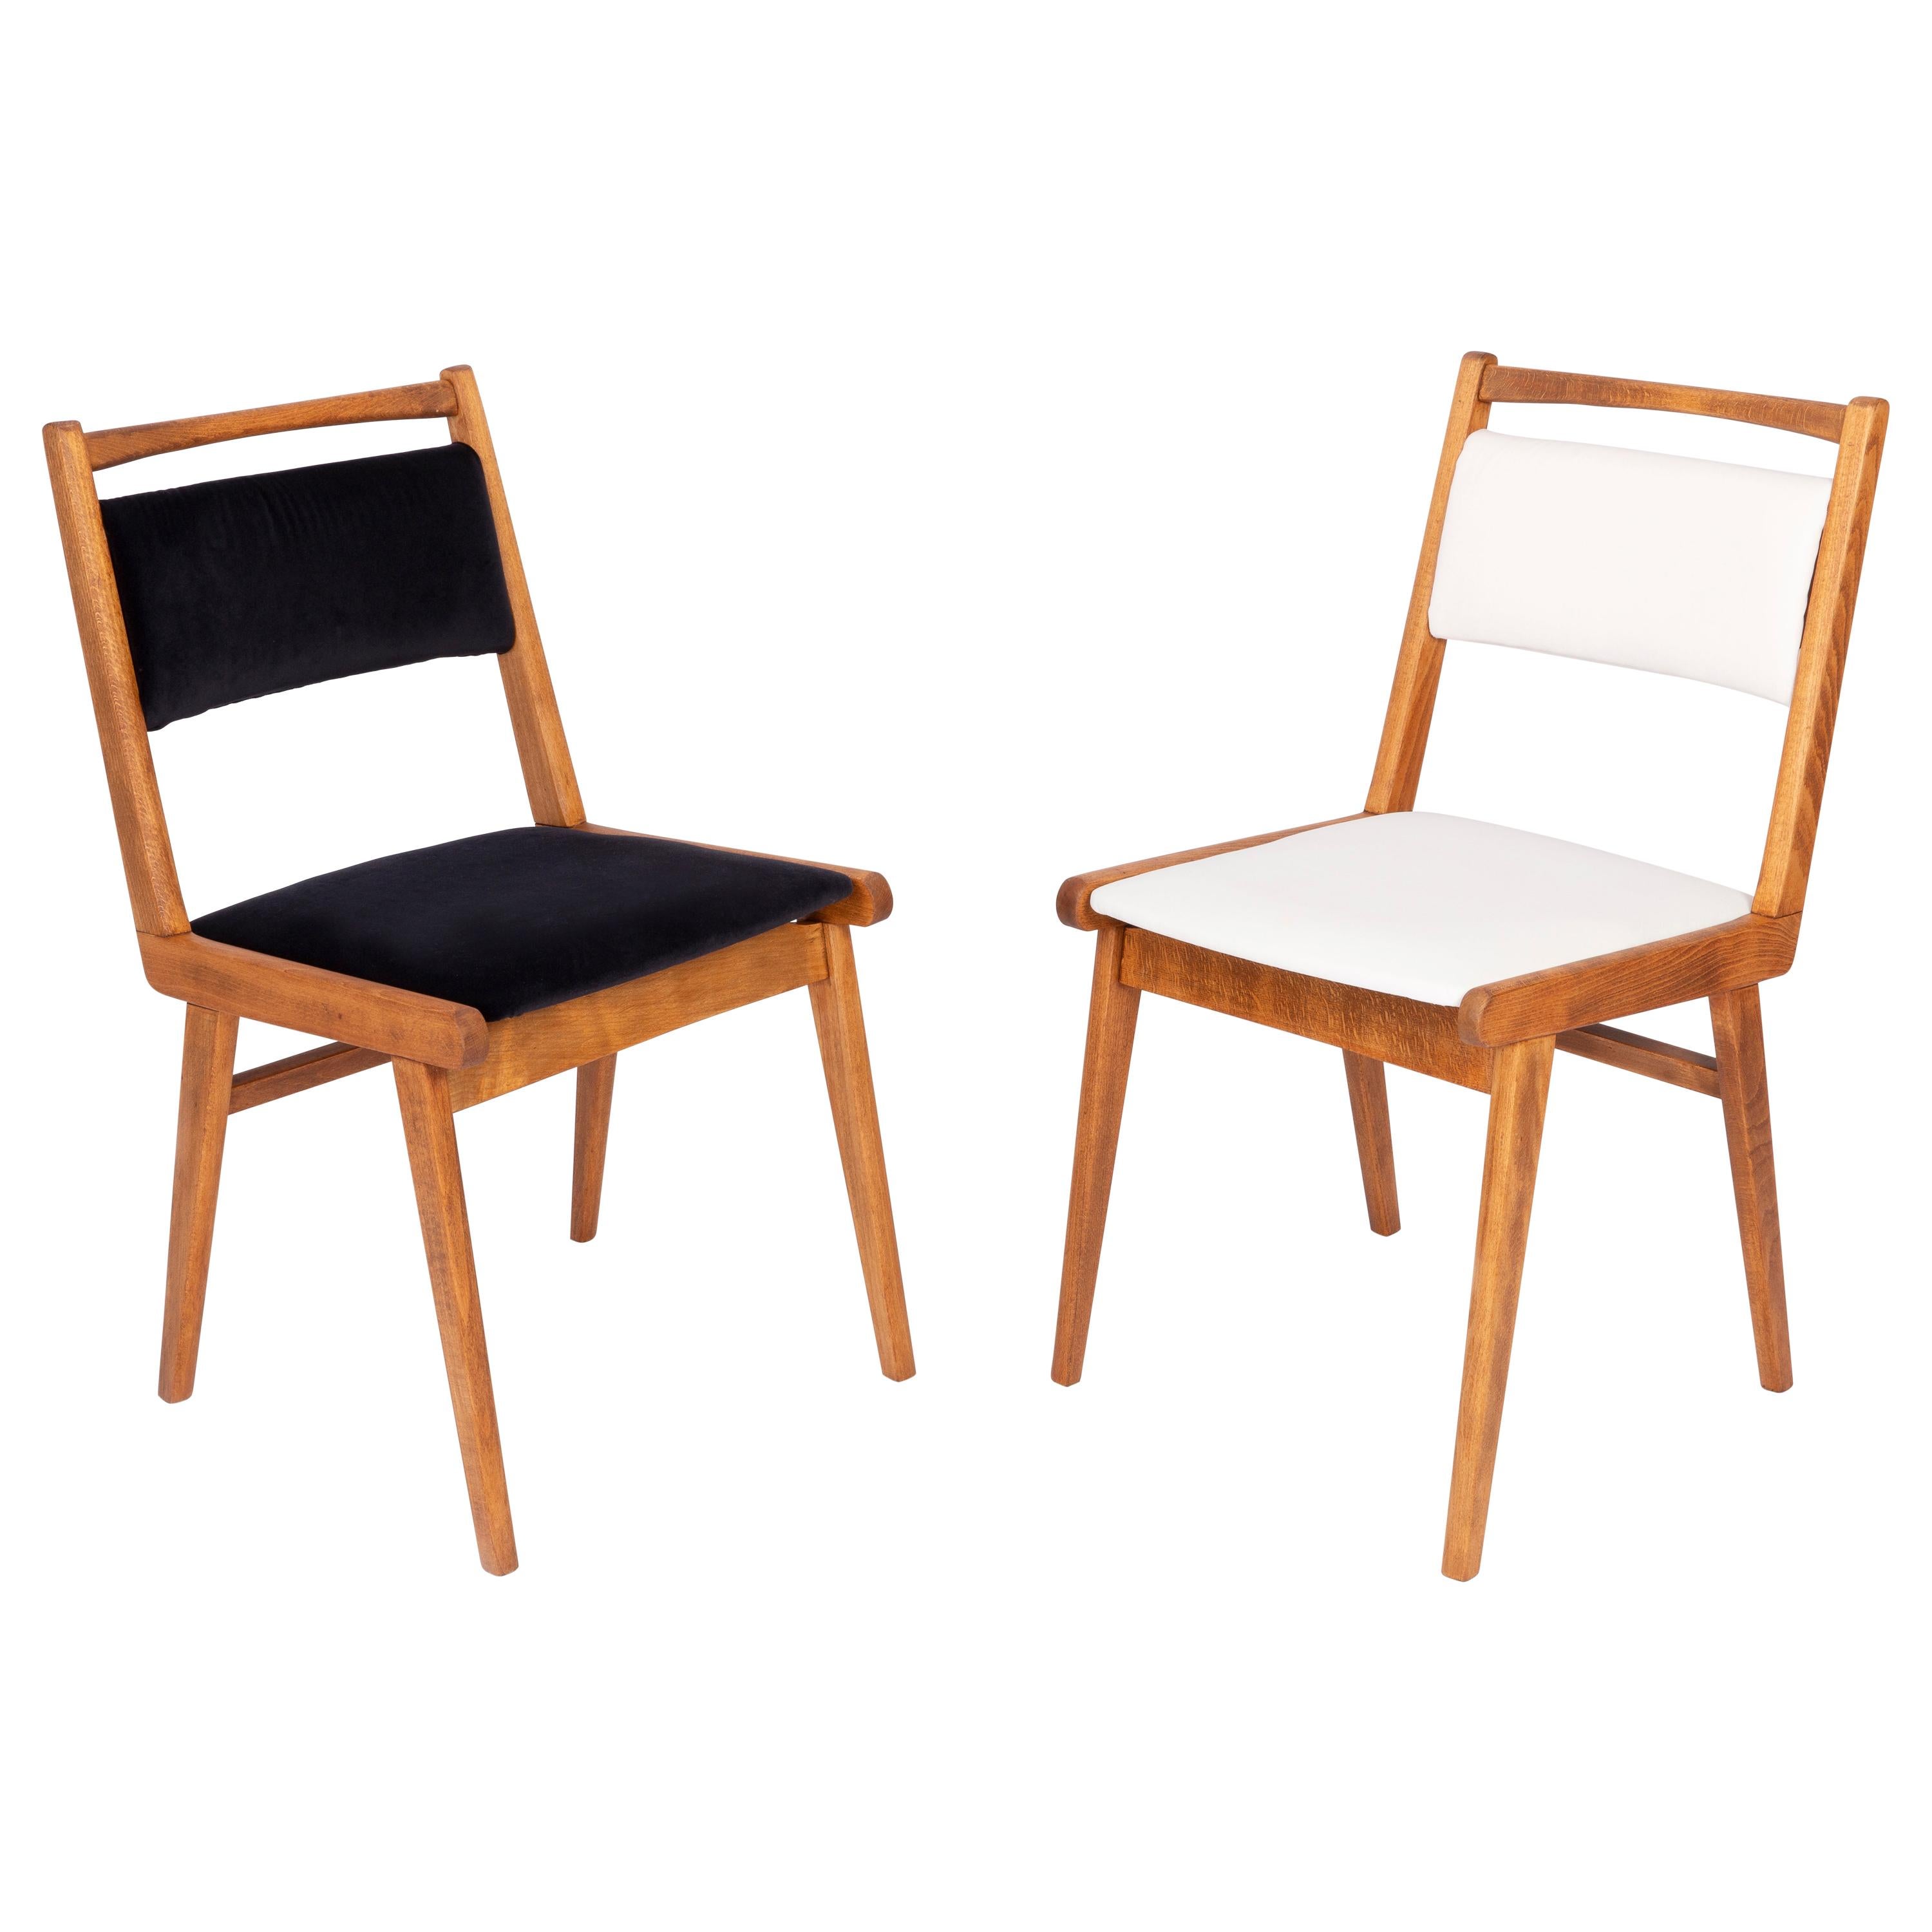 Set of Two 20th Century Black and White Velvet Chairs, Poland, 1960s